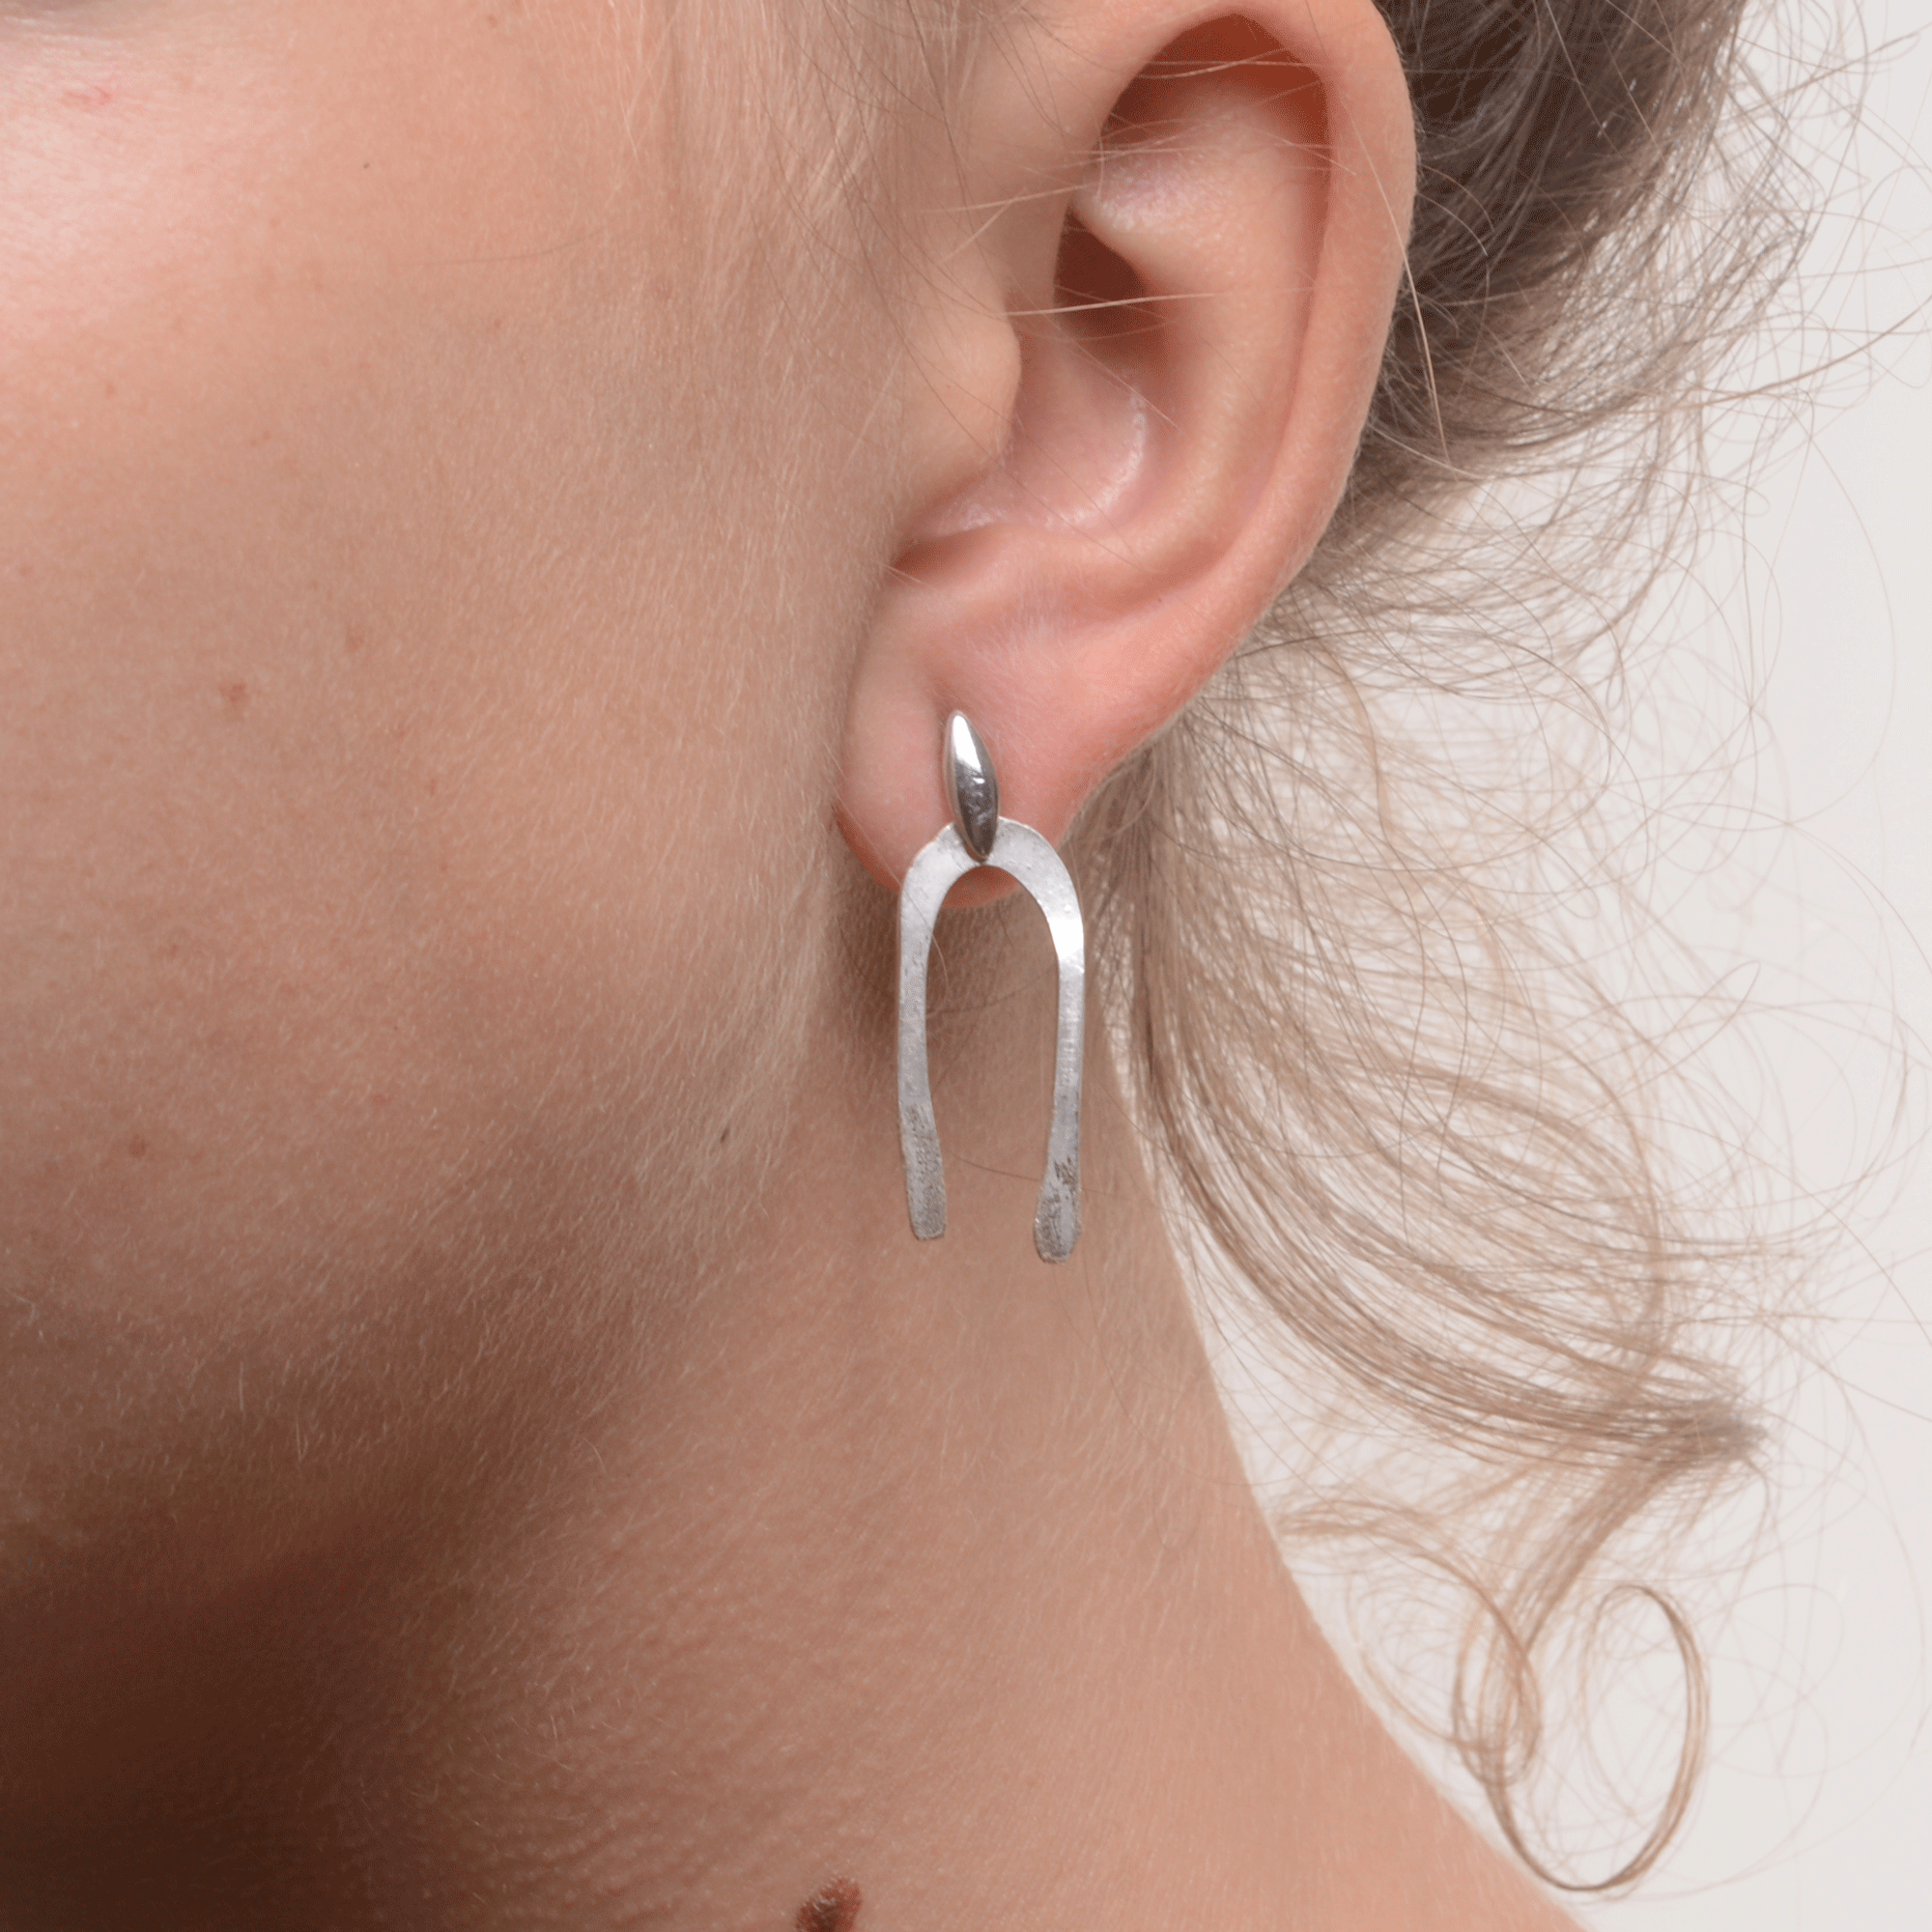 ARCO STERLING SILVER POST EARRINGS // SMALL